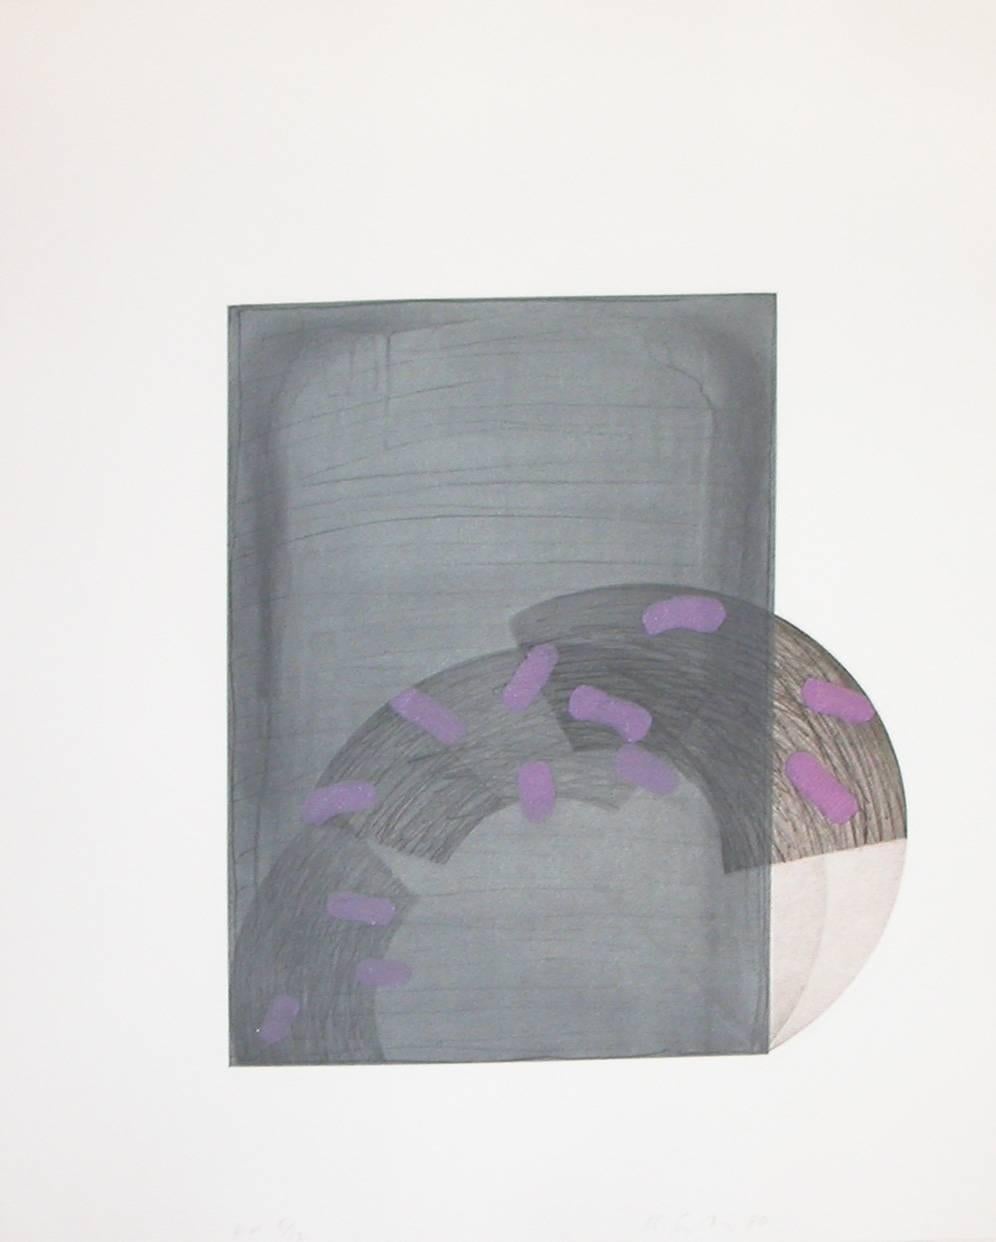 Abstract Print Richard Smith - Planches à dessin I (gris / violet)